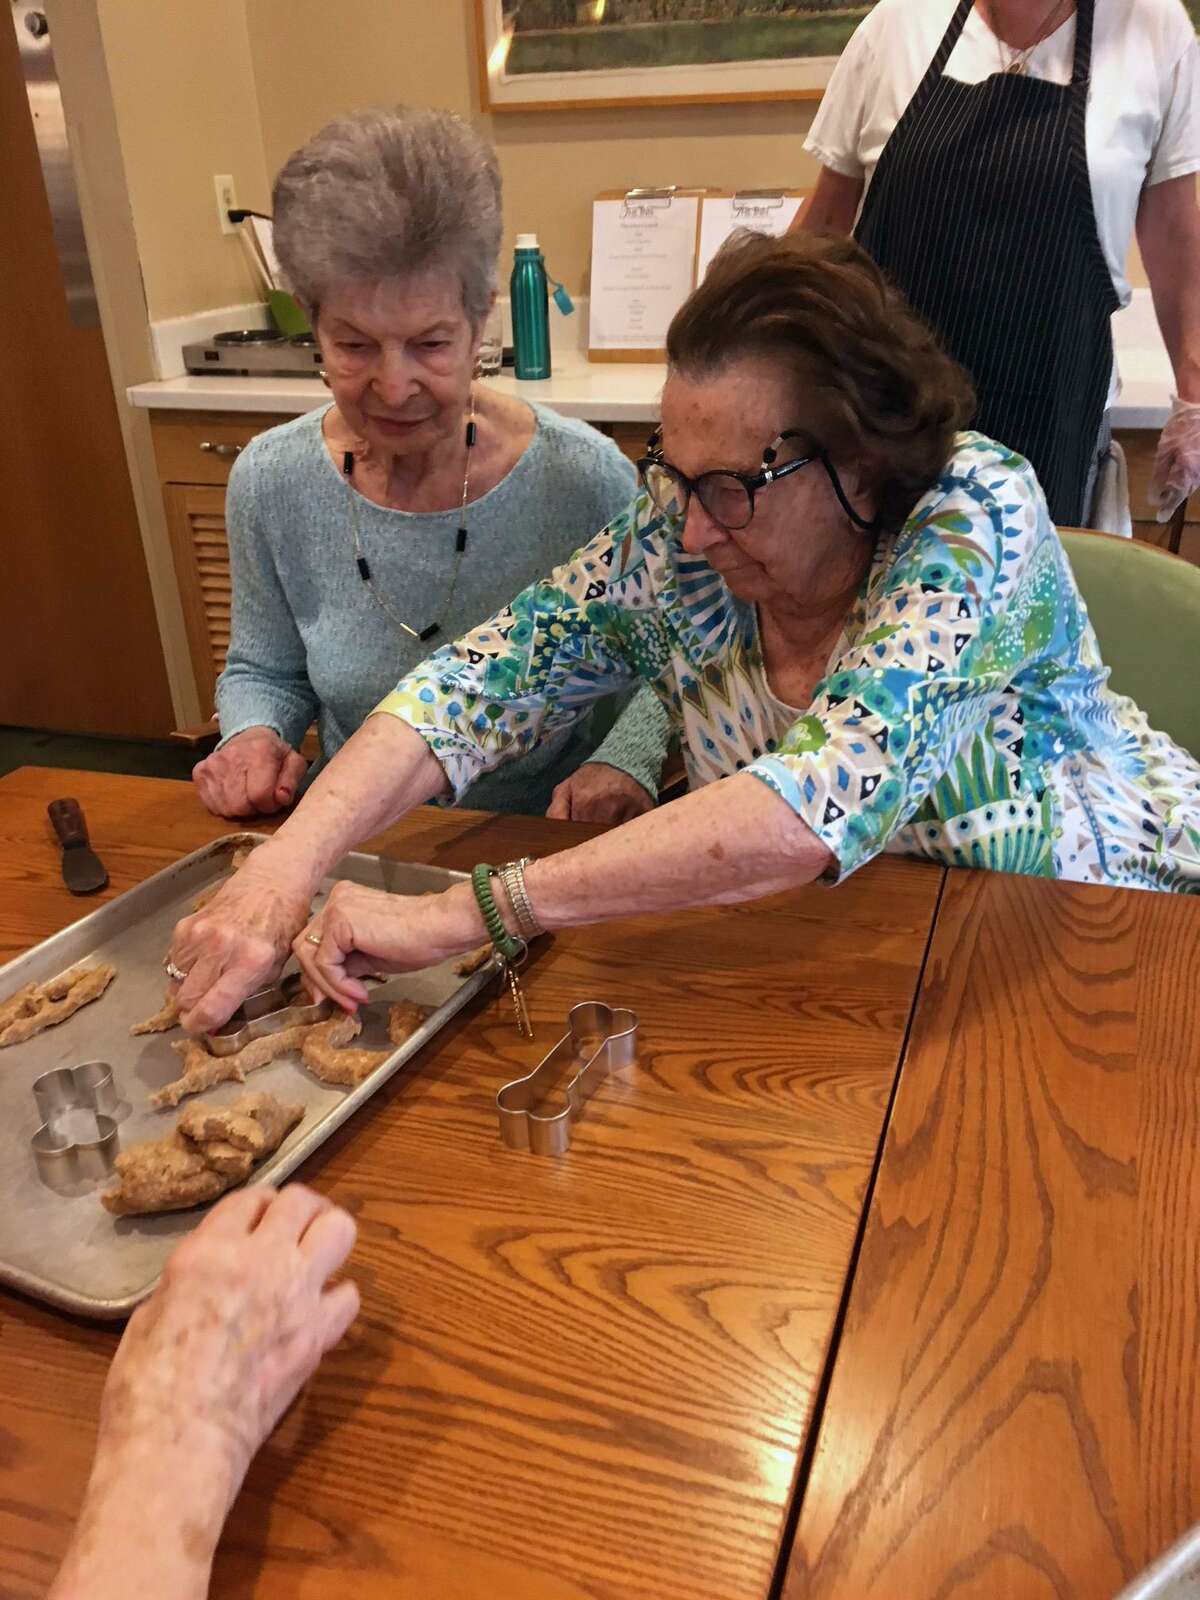 Using healthy ingredients, residents at The Inn at 73 Oenoke Ridge, in New Canaan, baked homemade dog biscuits, which they donated to PAWS of Norwalk. Rresidents Jennie and Ellie use bone-shaped cookie cutters to shape the biscuits, while Catherine flattens out the dough.